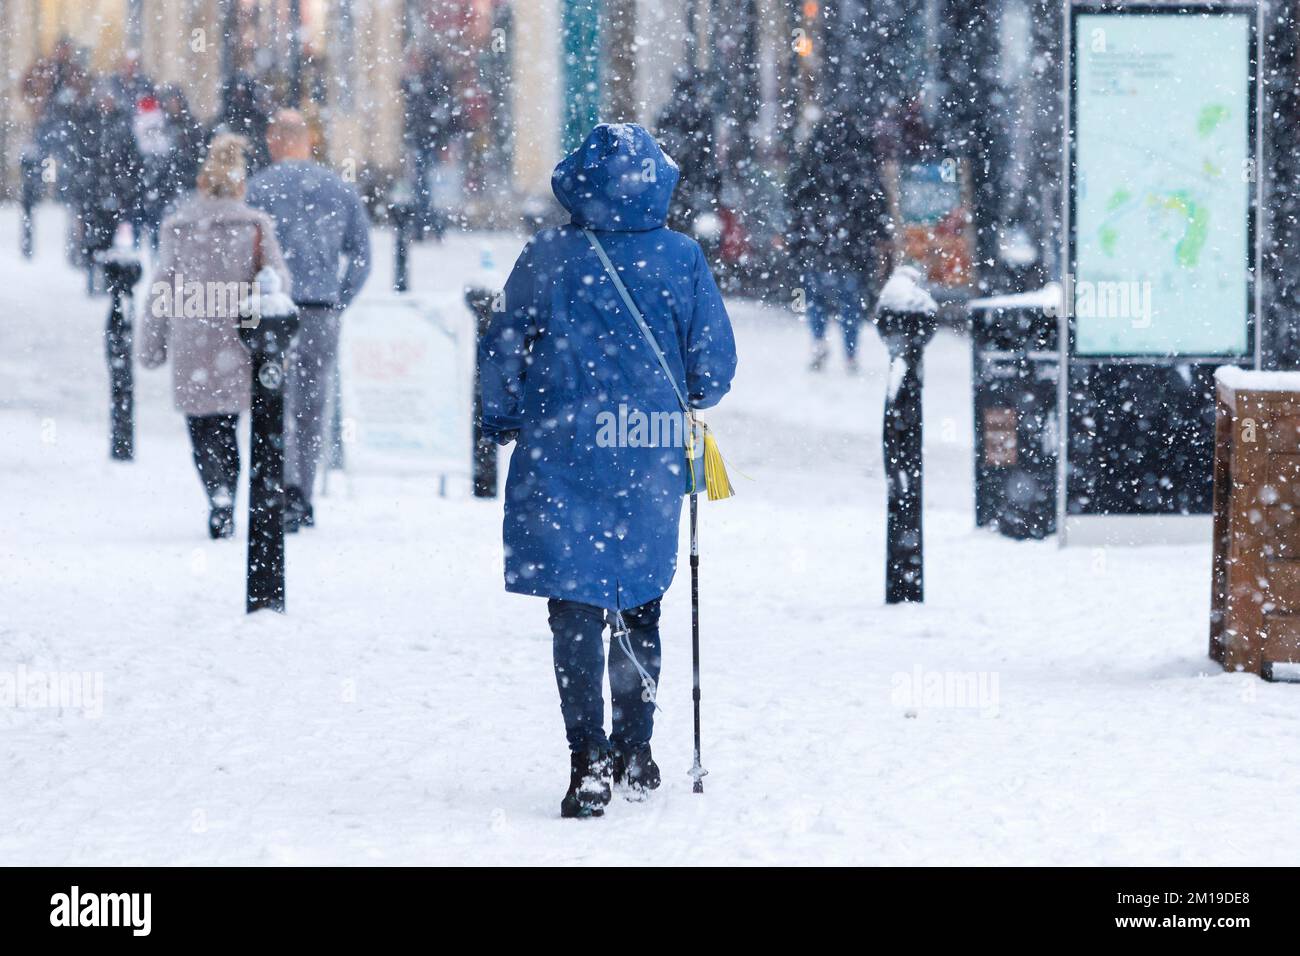 Chippenham, Wiltshire, UK, 11th Dec, 2022. As Chippenham residents wake up to their first snow of the year, shoppers are pictured walking in the High Street as heavy snow falls.  Credit: Lynchpics/Alamy Live News. Stock Photo